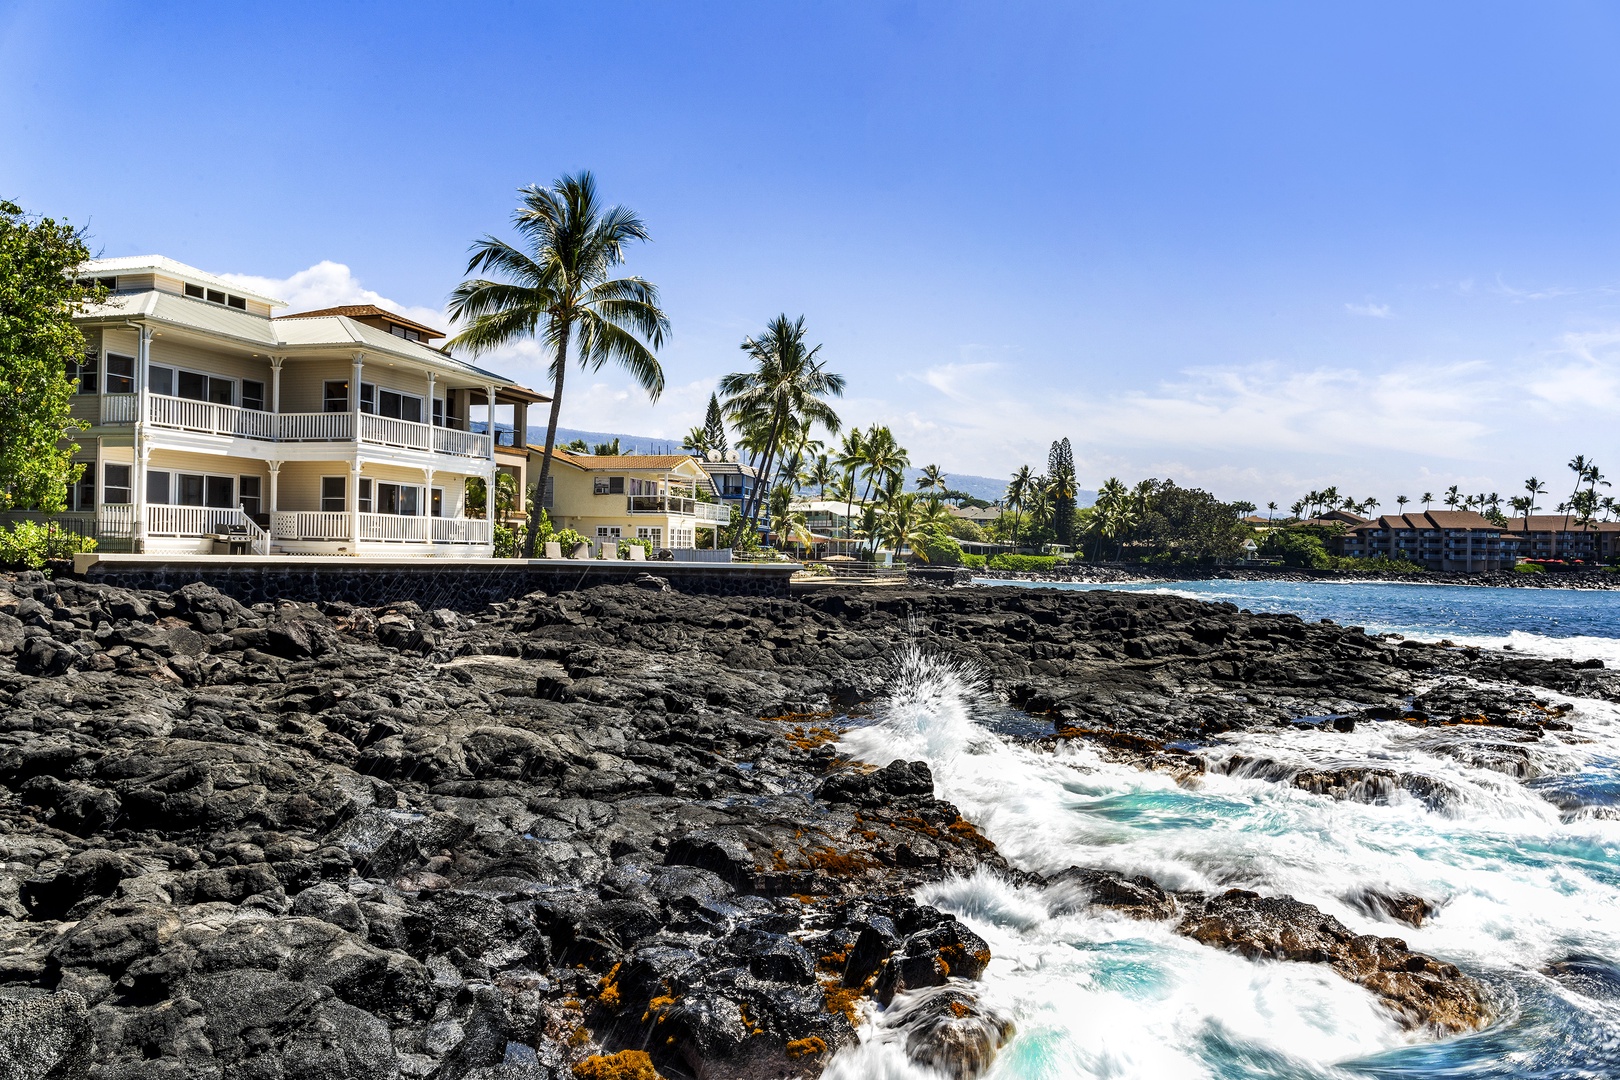 Kailua Kona Vacation Rentals, Dolphin Manor - Waves crashing in front of the home